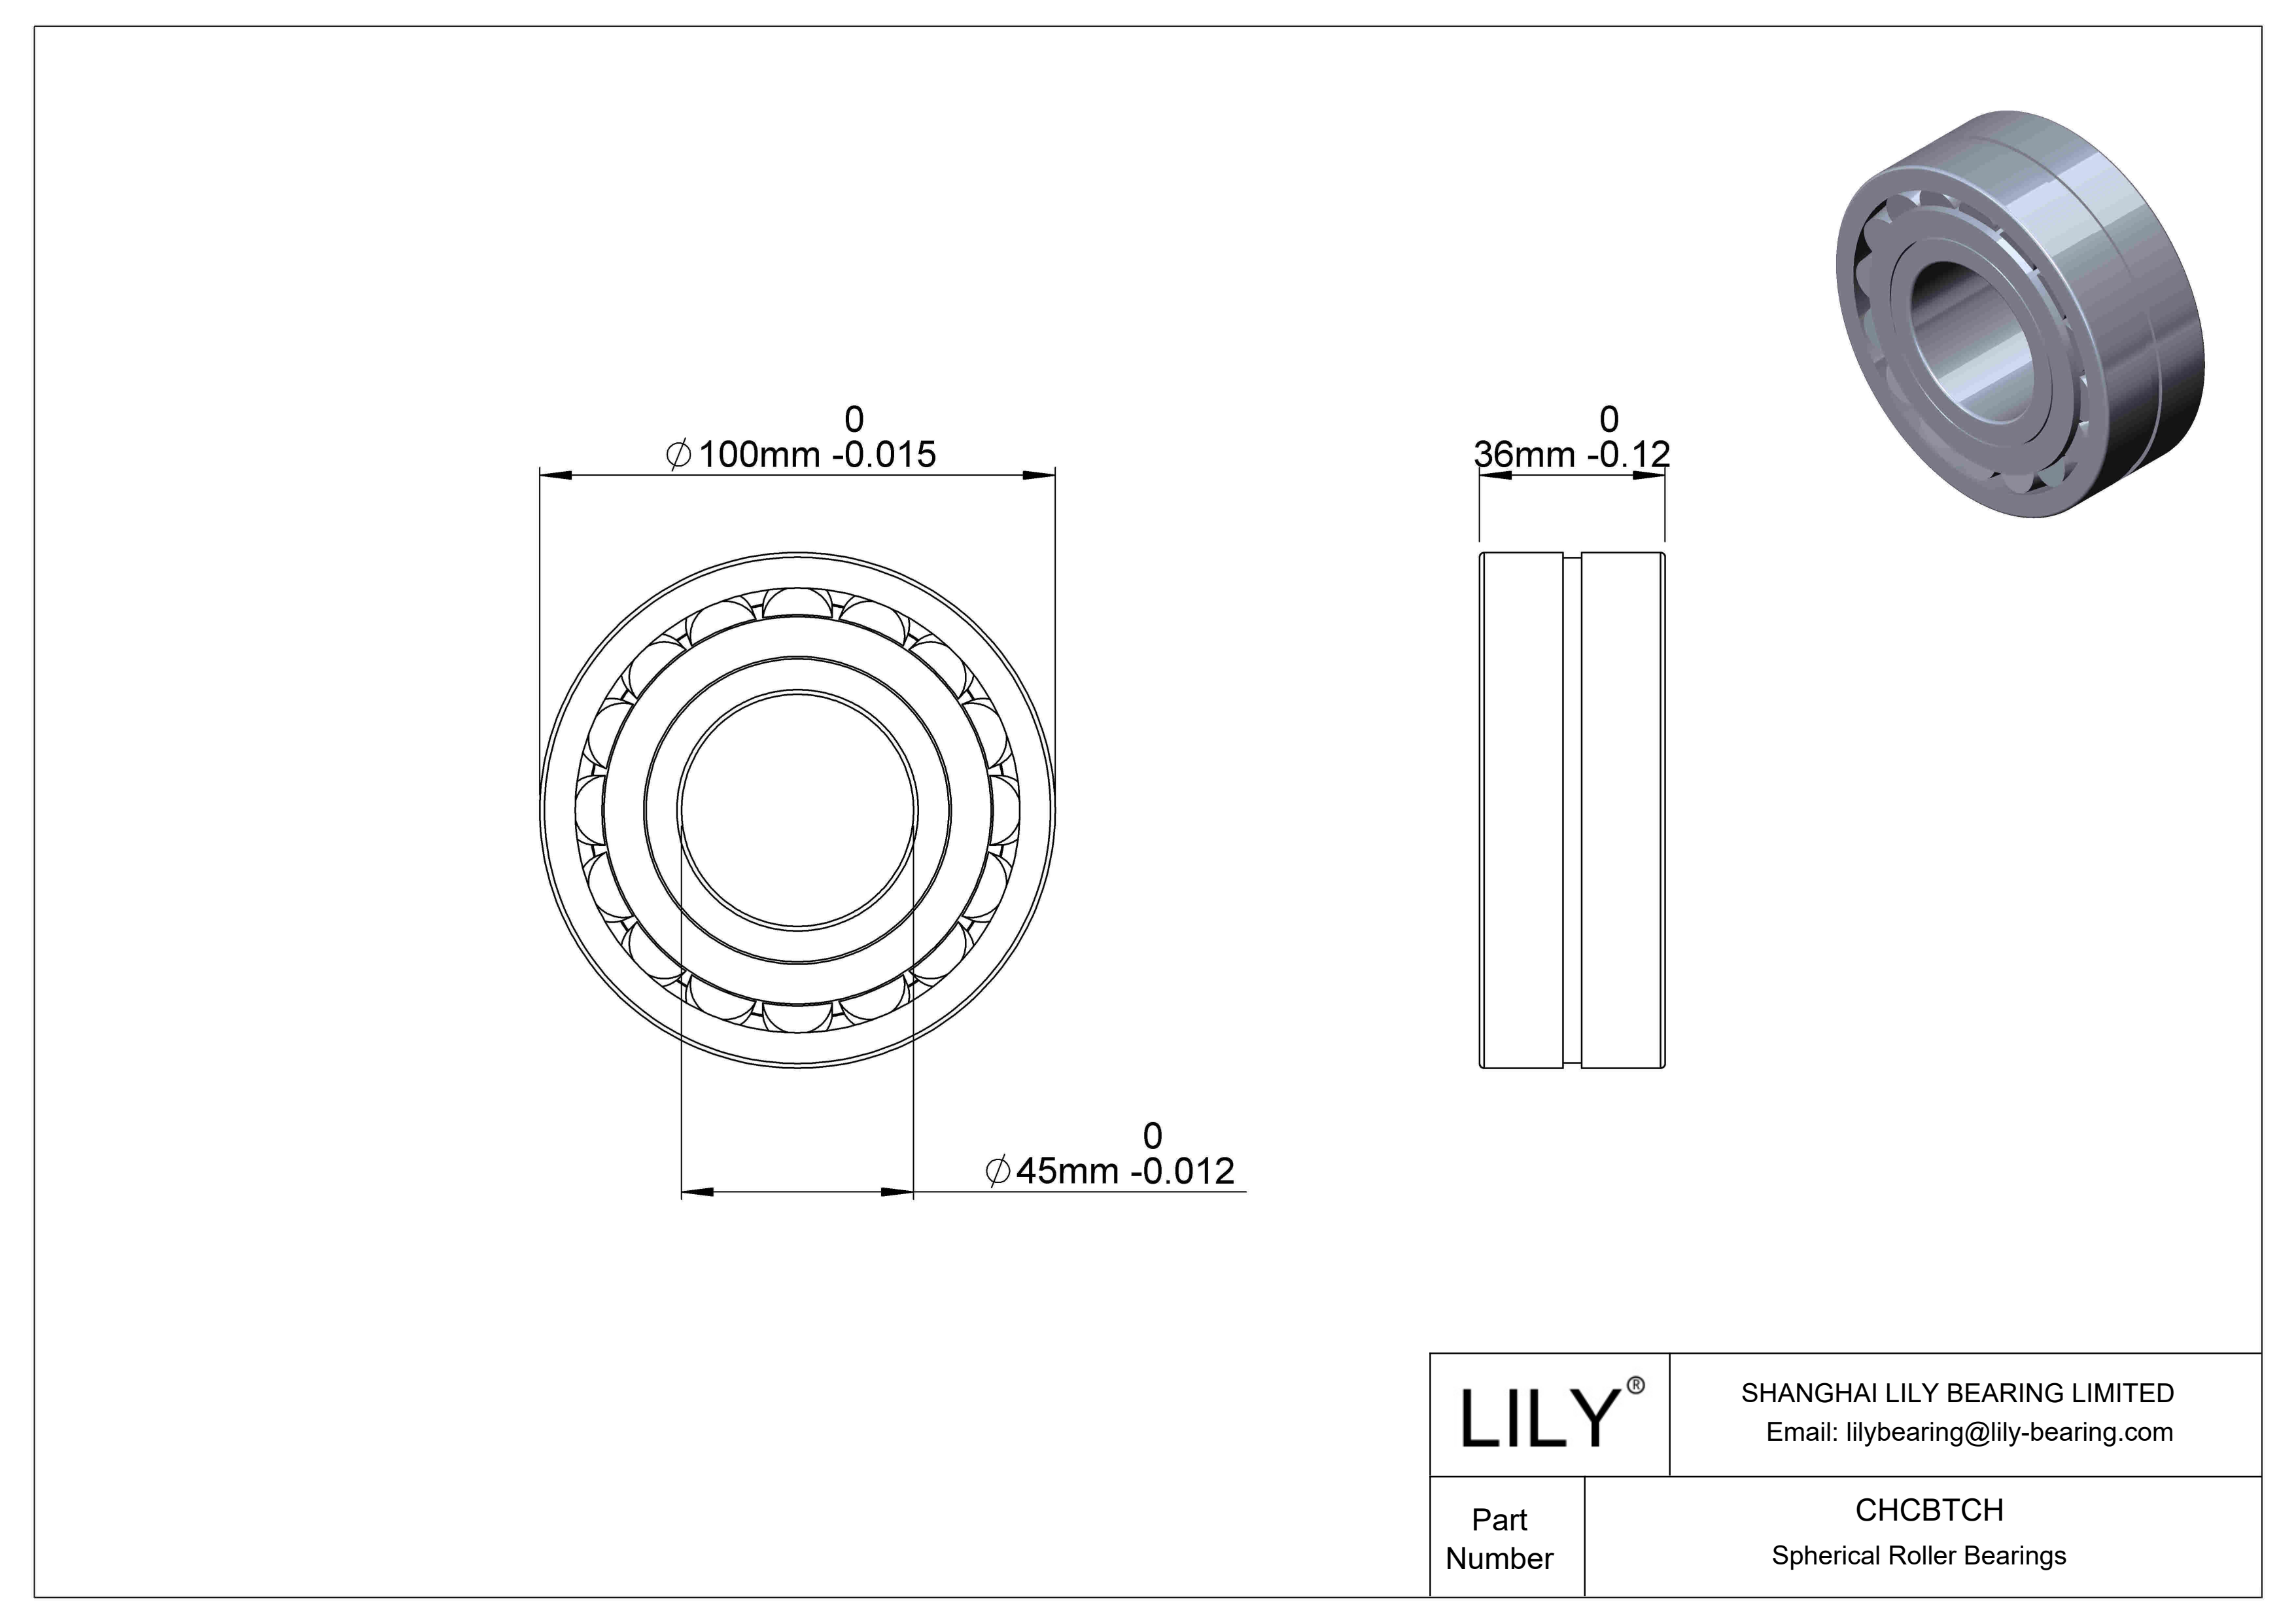 CHCBTCH Spherical Roller Bearings cad drawing